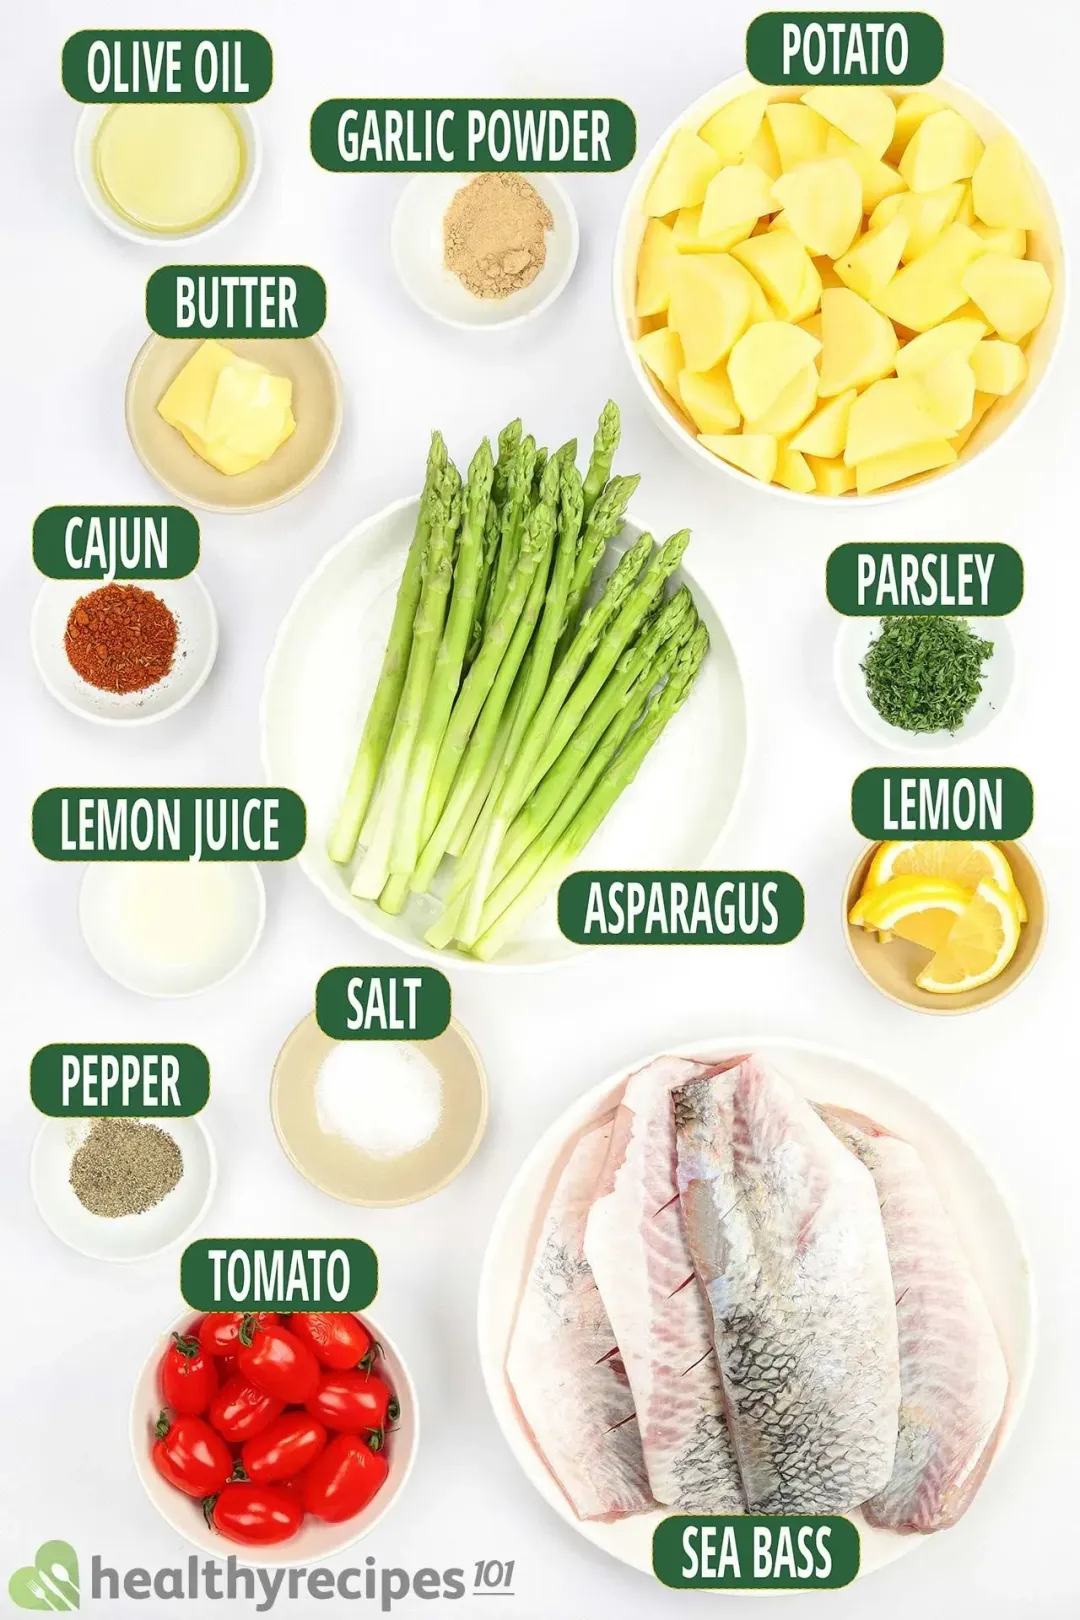 Ingredients for Baked Sea Bass